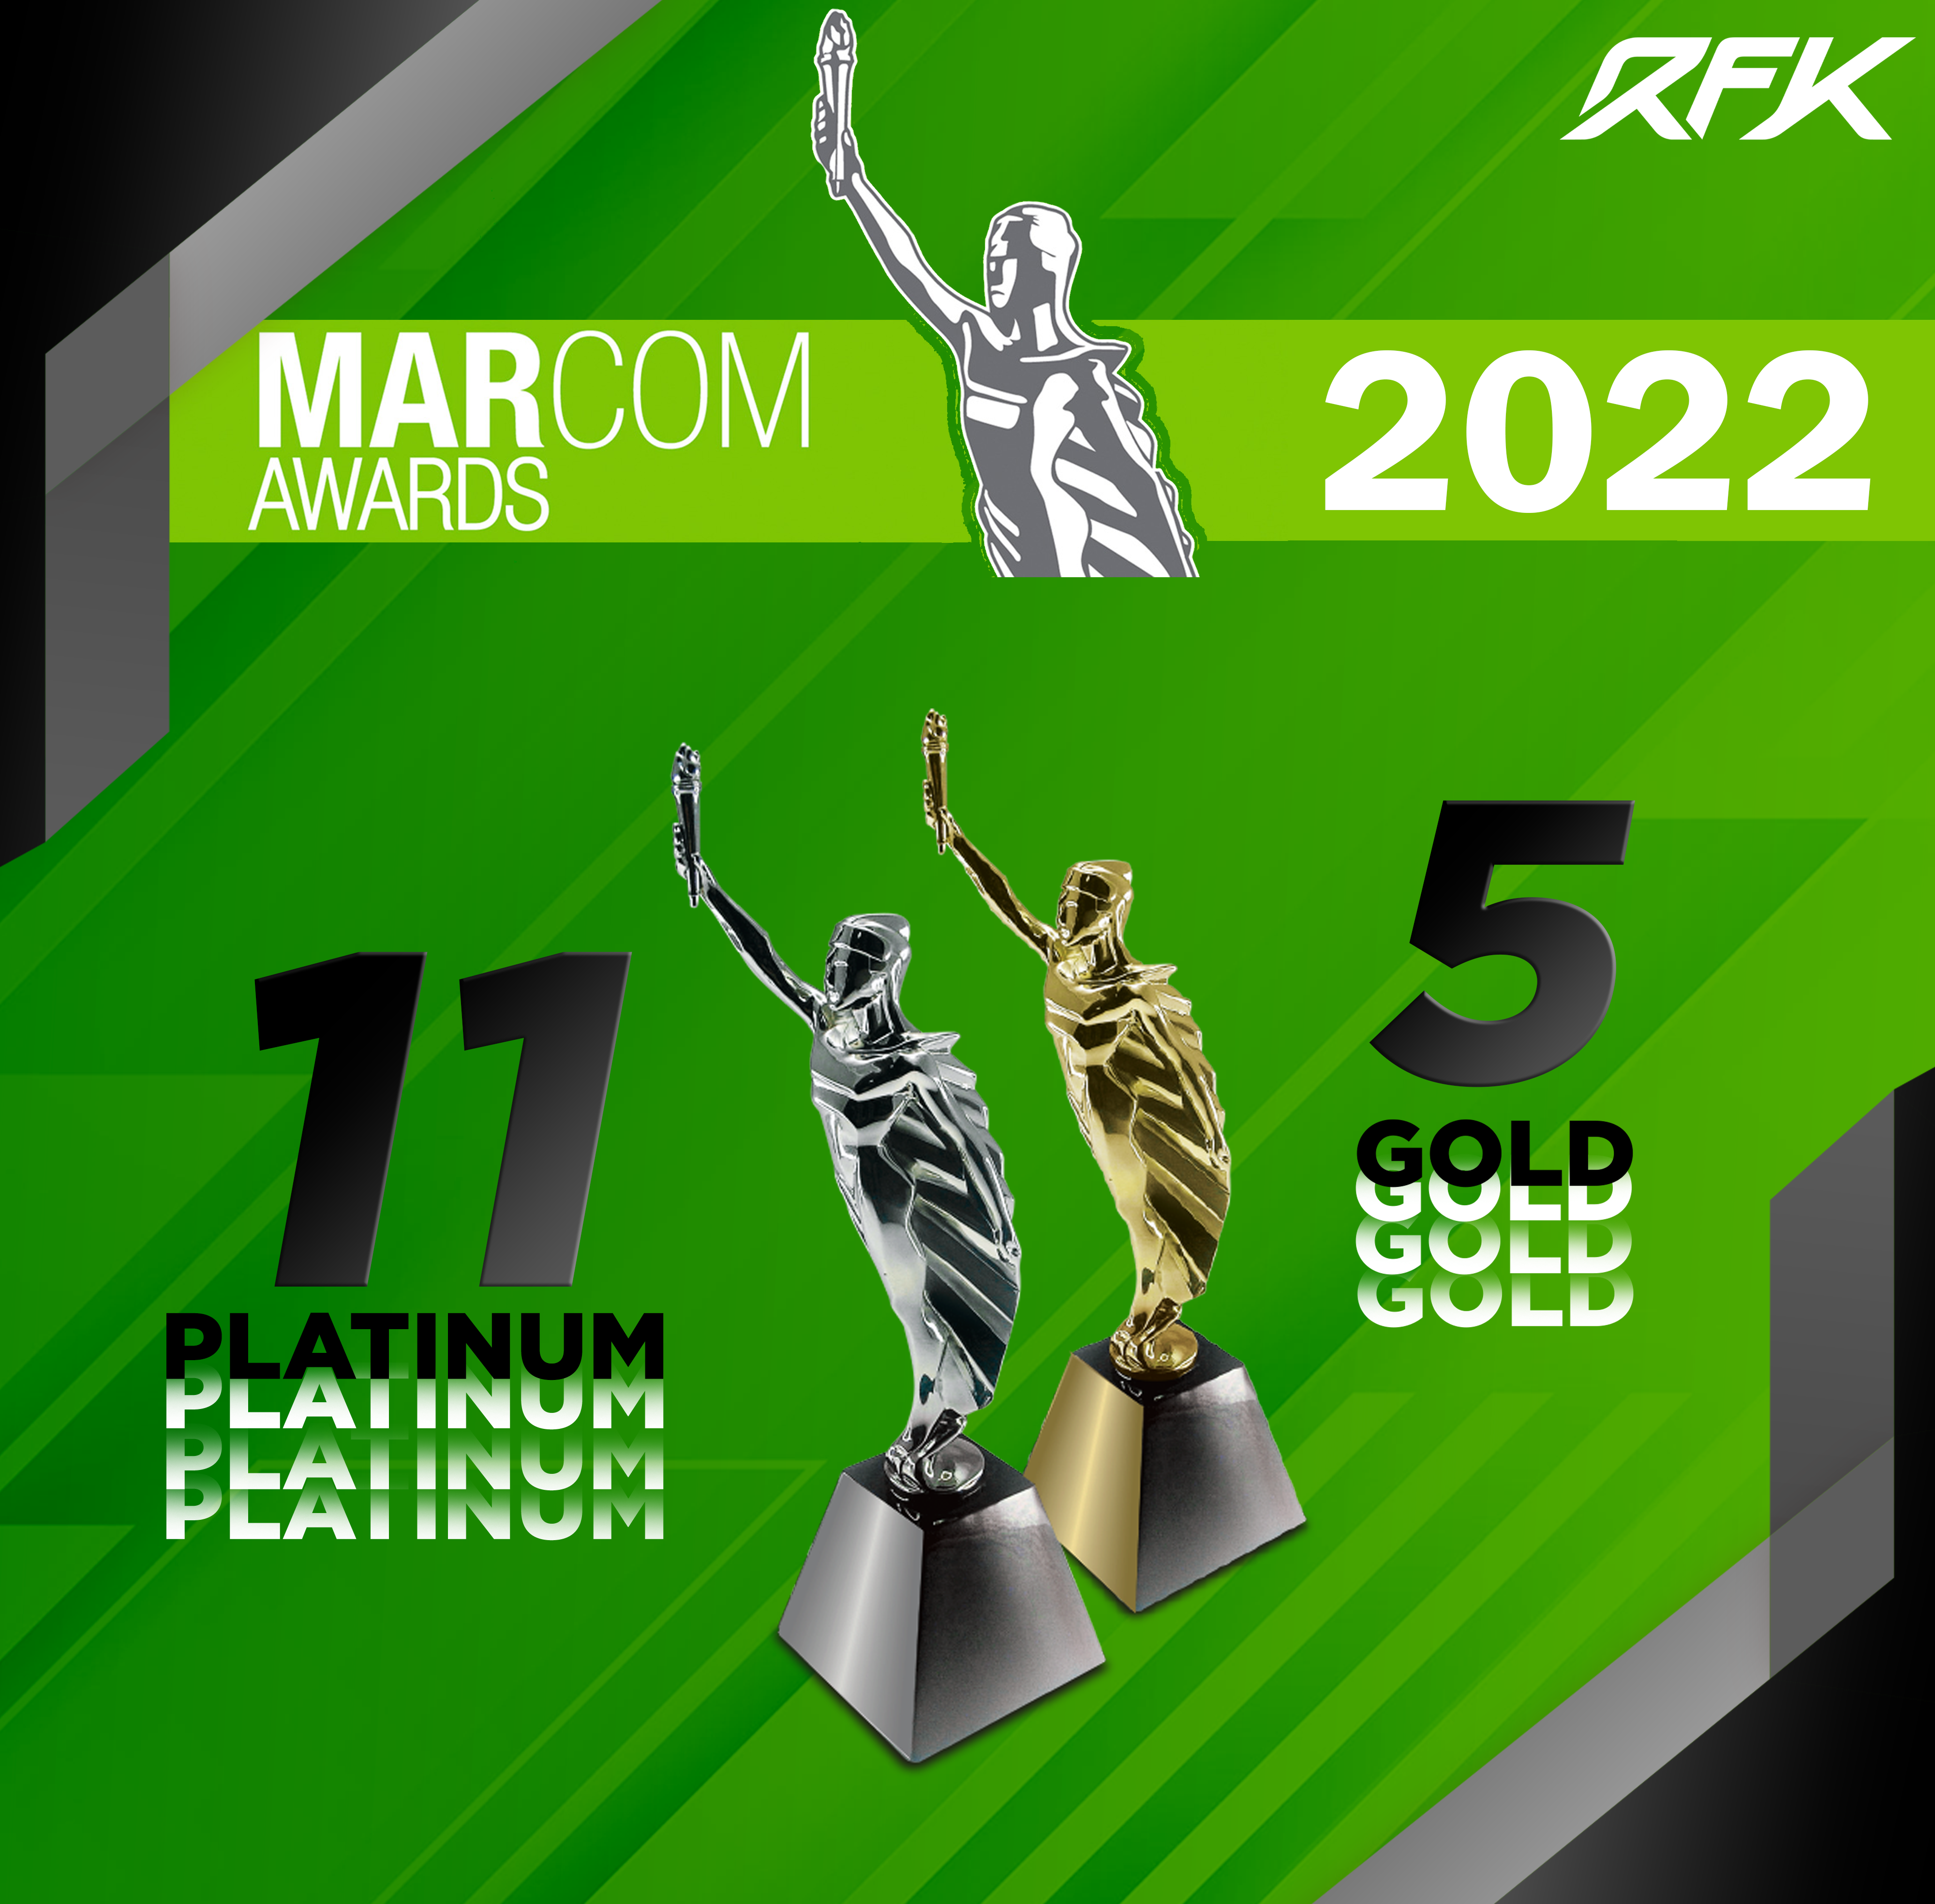 RFK Racing Scores Record Year with 2022 MarCom Awards